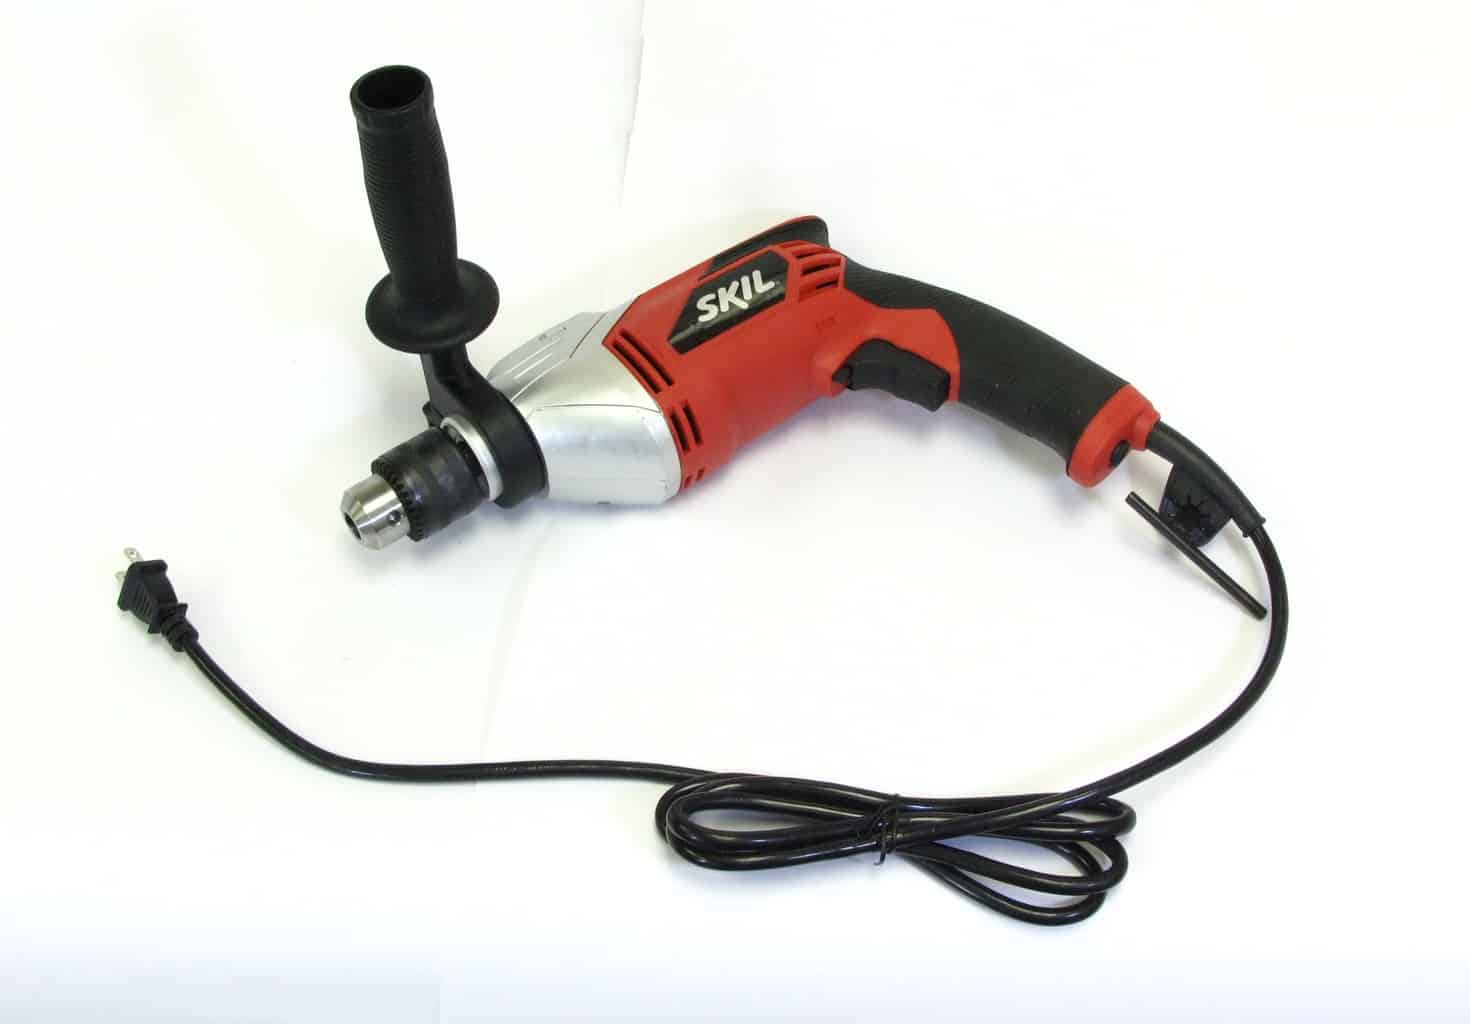 TOOL : Workshop : Corded Hammer Drill